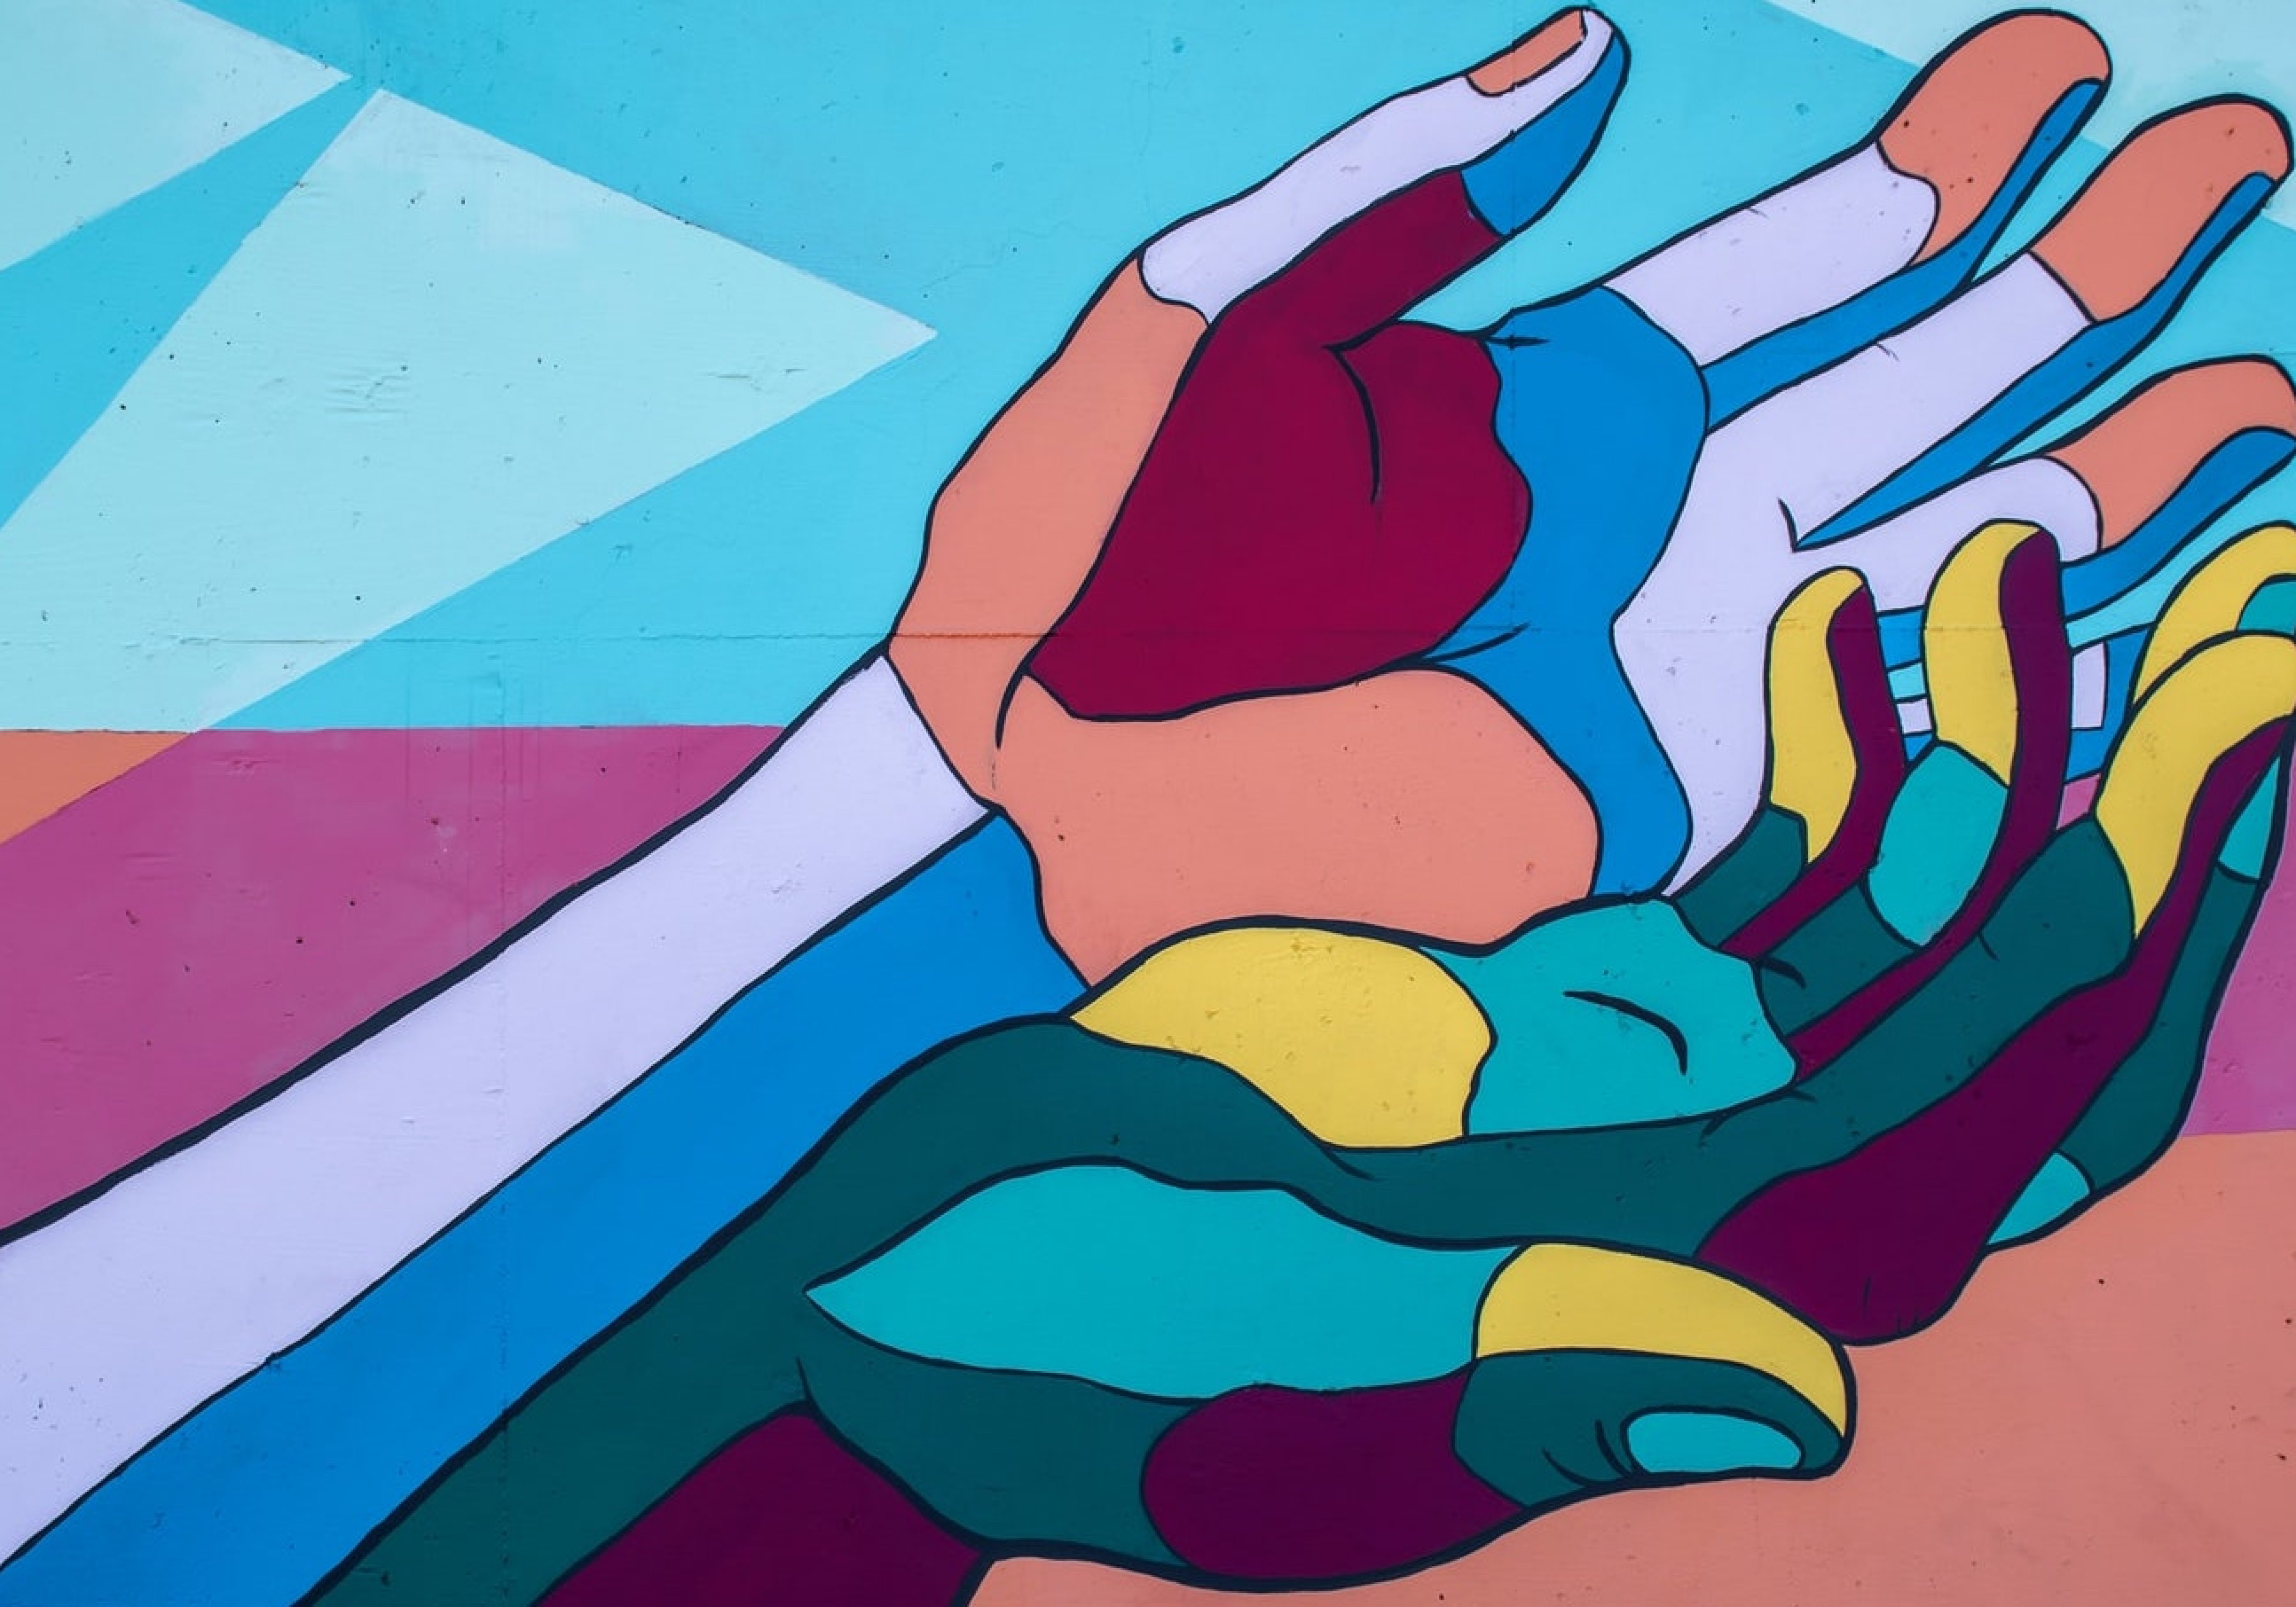 Abstract illustration of two duo-tone coloured hands touching the side of the palms symbolising diversity and inclusion.